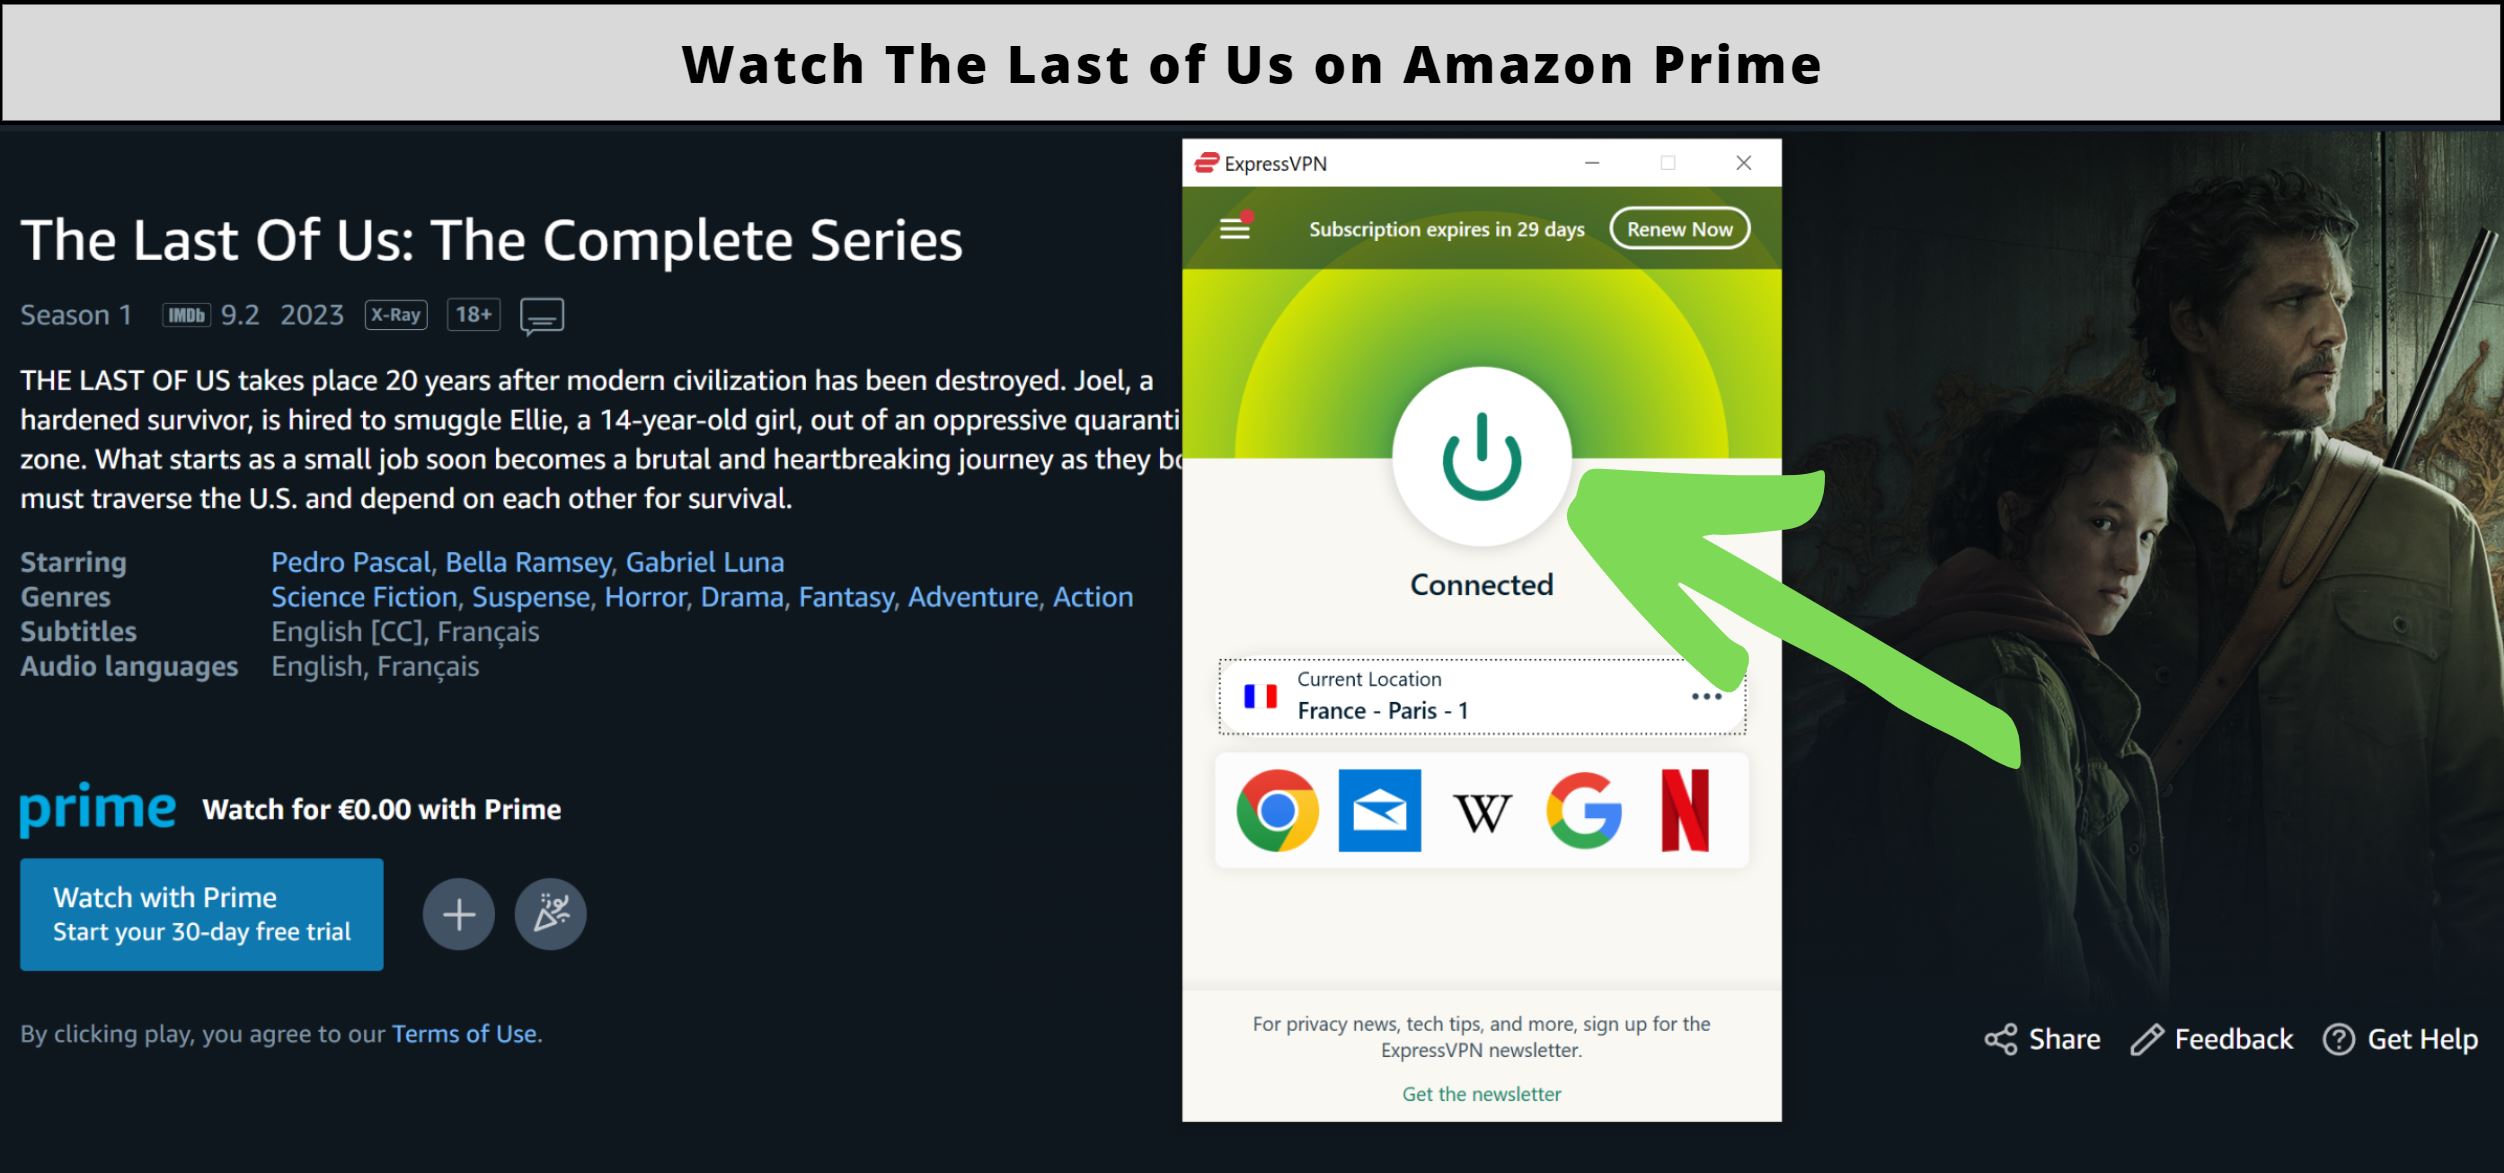 Is The Last of Us on Prime Video| How to watch The Last of Us on Amazon Prime From Canada or the United States